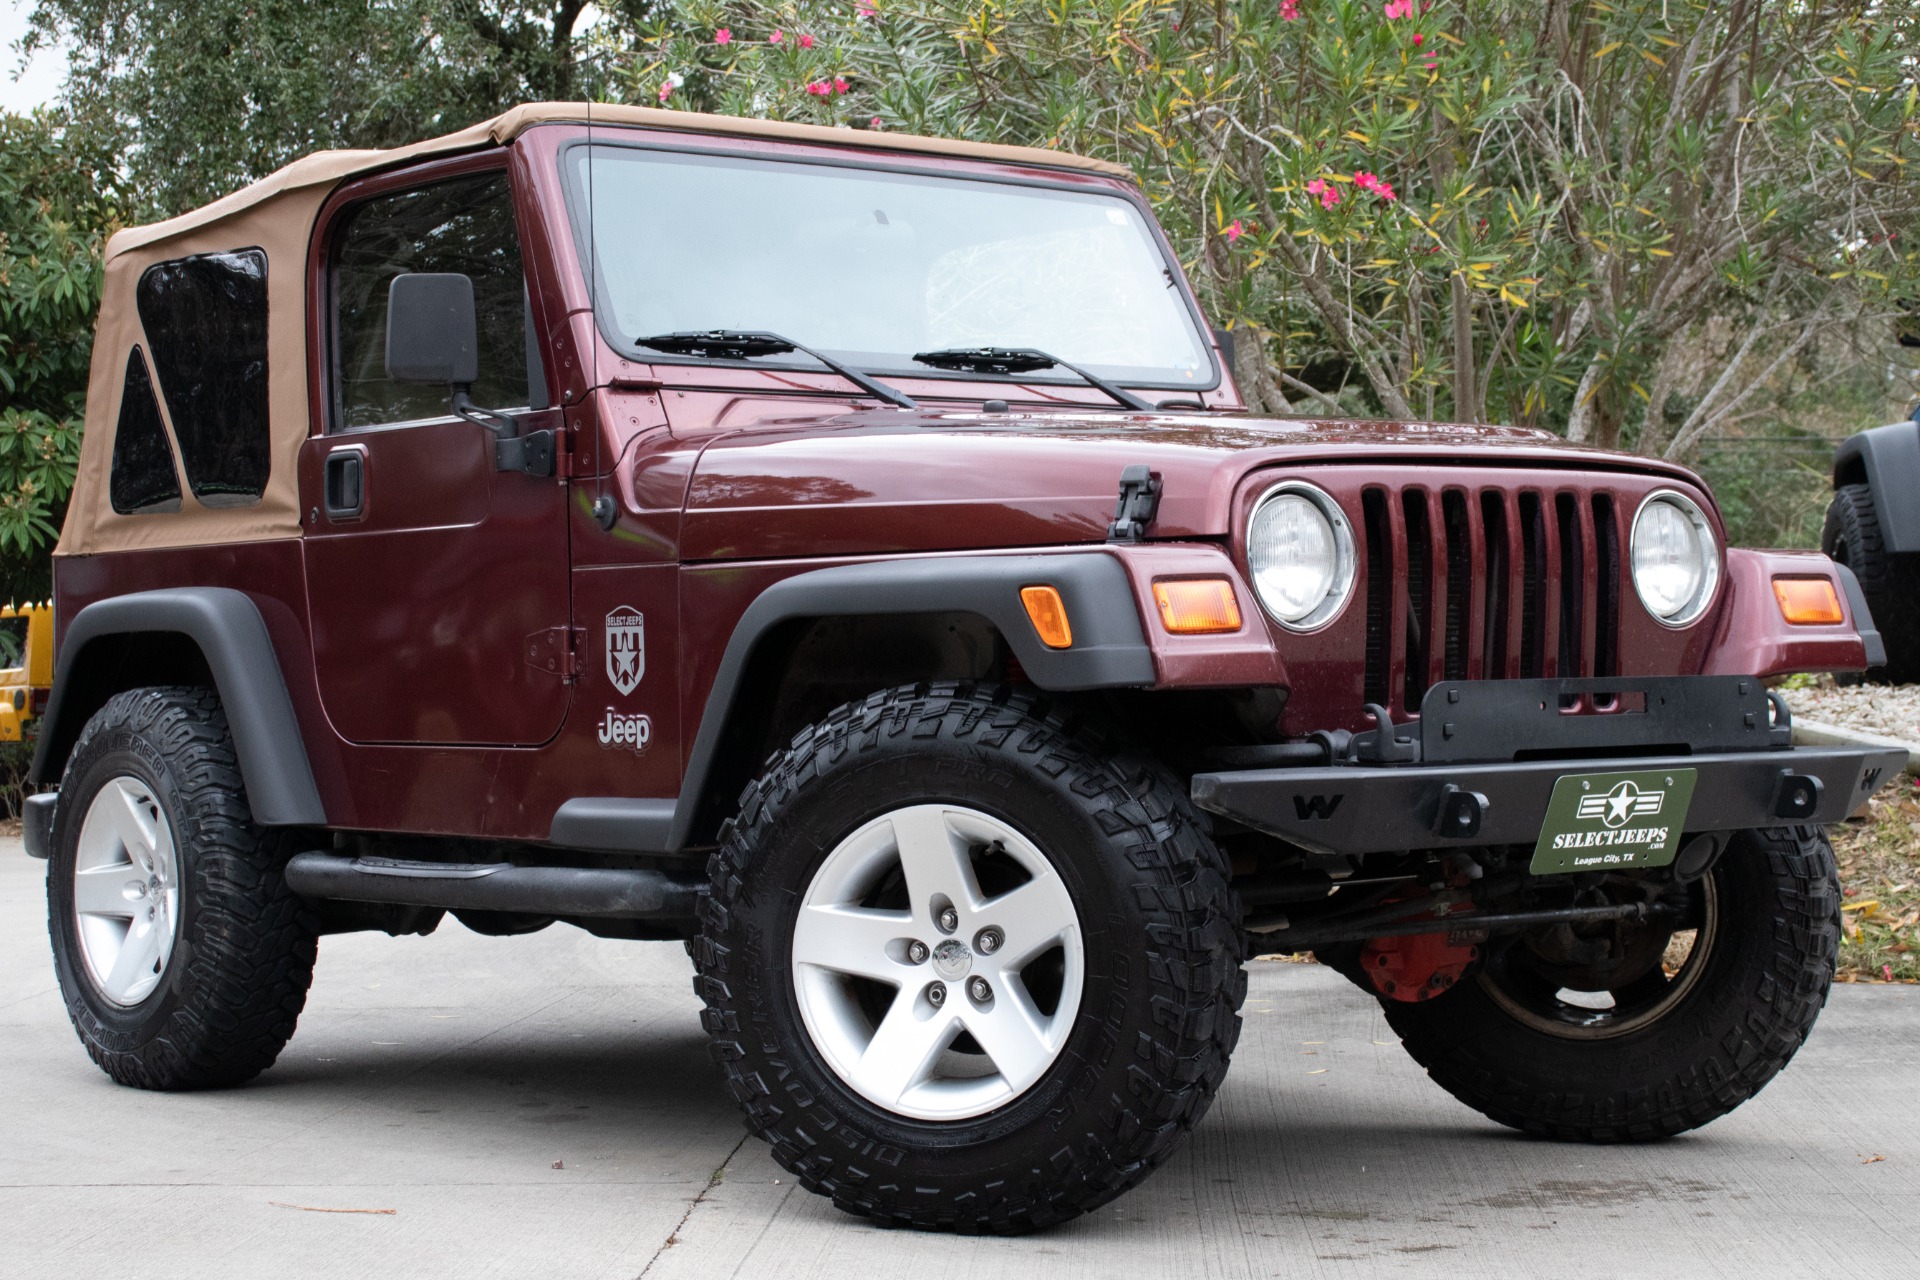 Used 2001 Jeep Wrangler Sport For Sale ($13,995) | Select Jeeps Inc. Stock  #344646